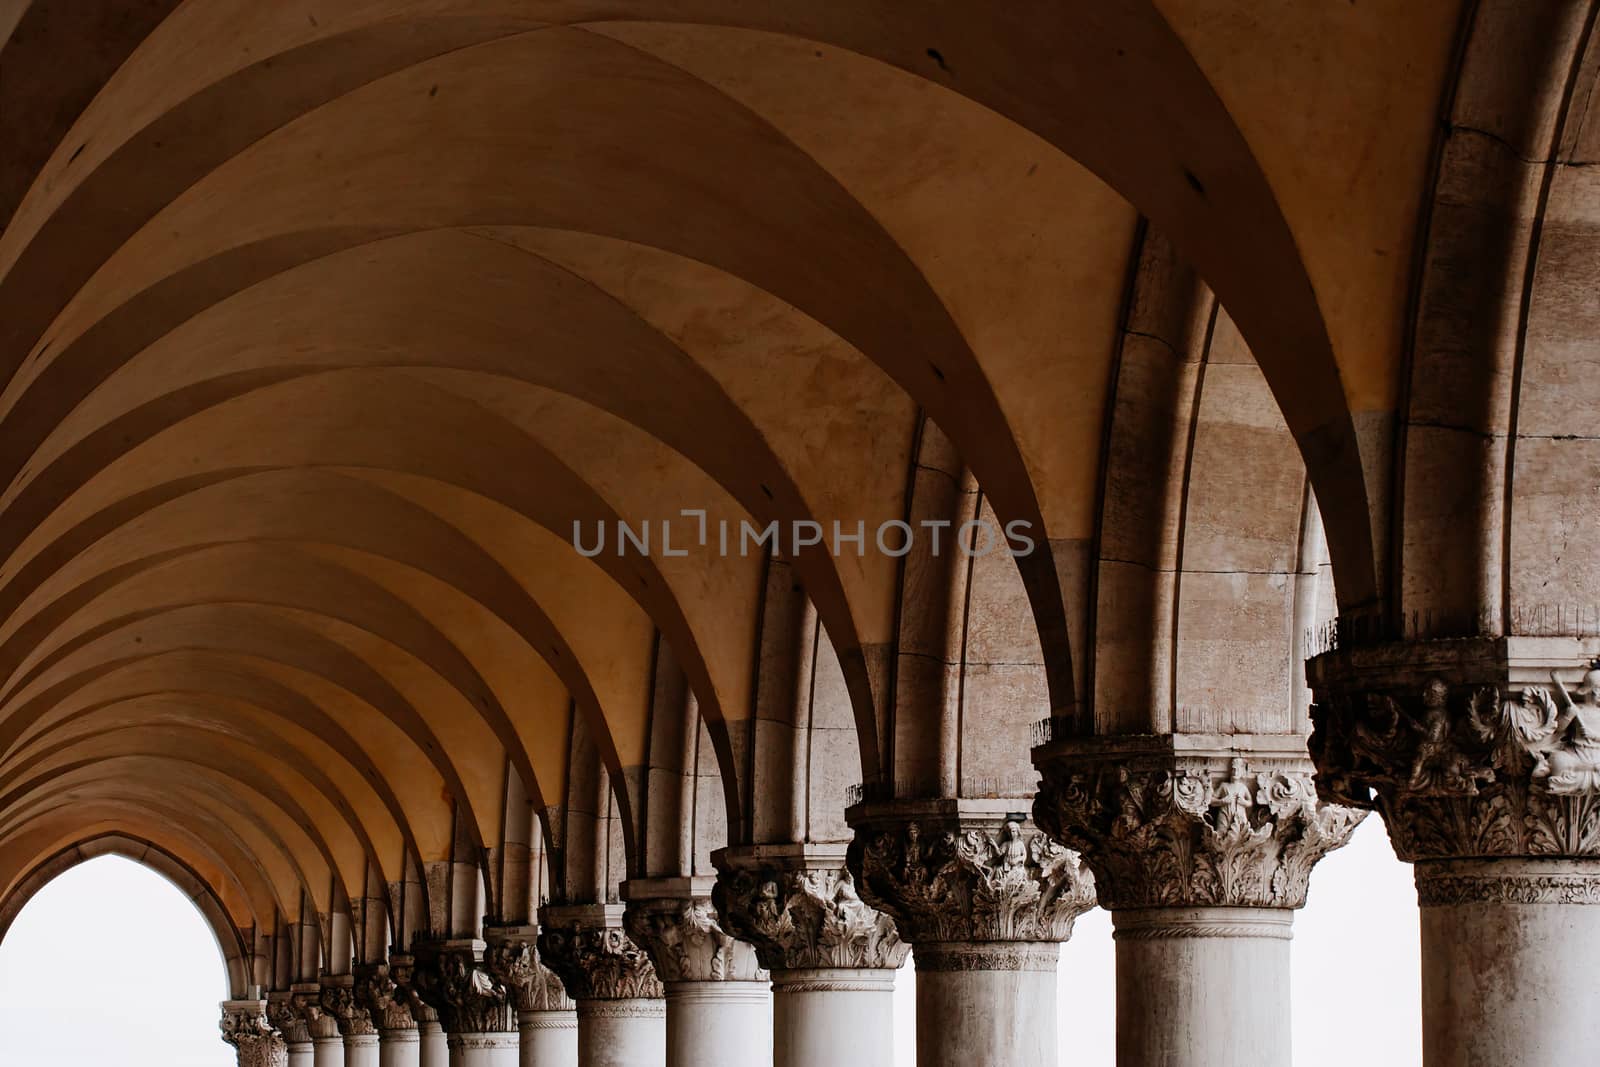 Columns and Arches by sumners